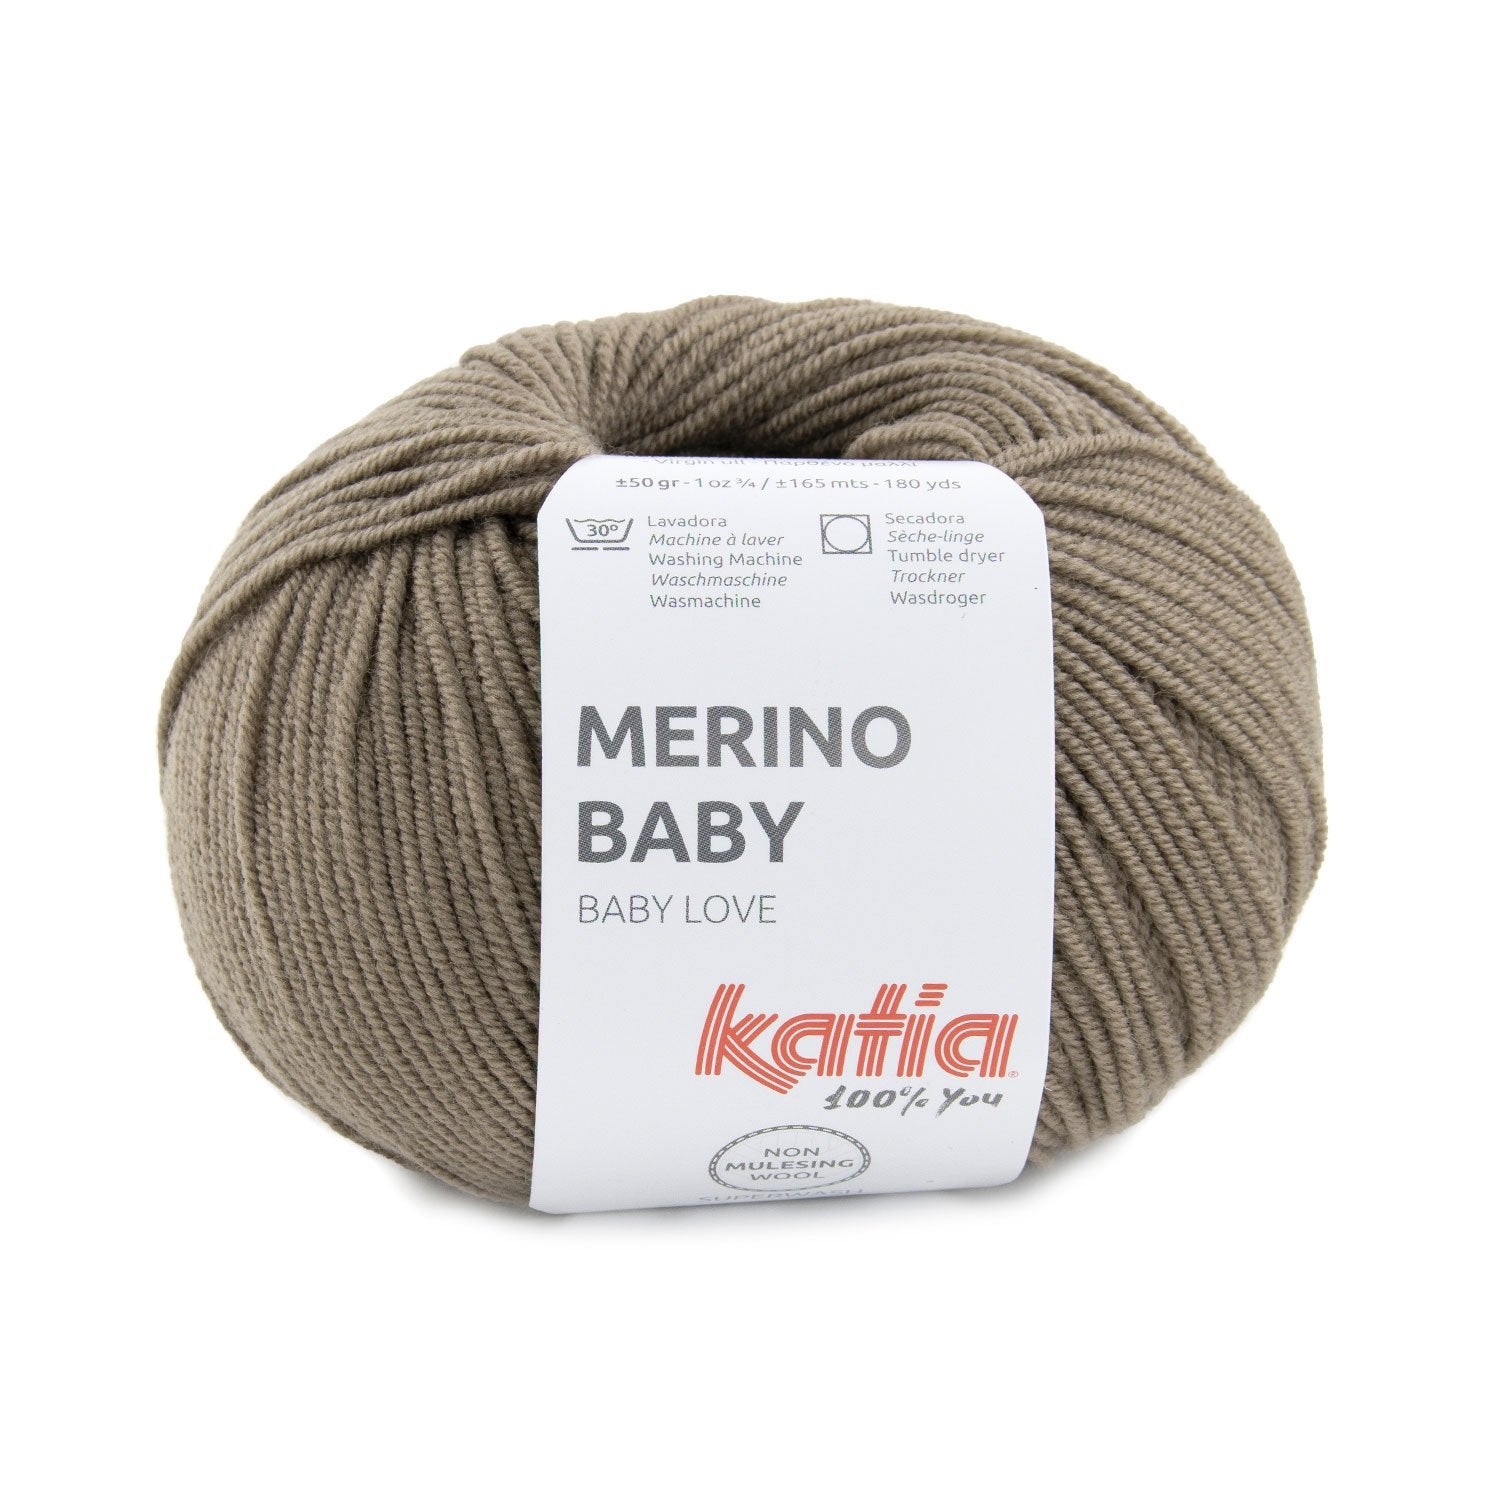 Katia Merino Baby - Soft wool for delicate skin of babies and children